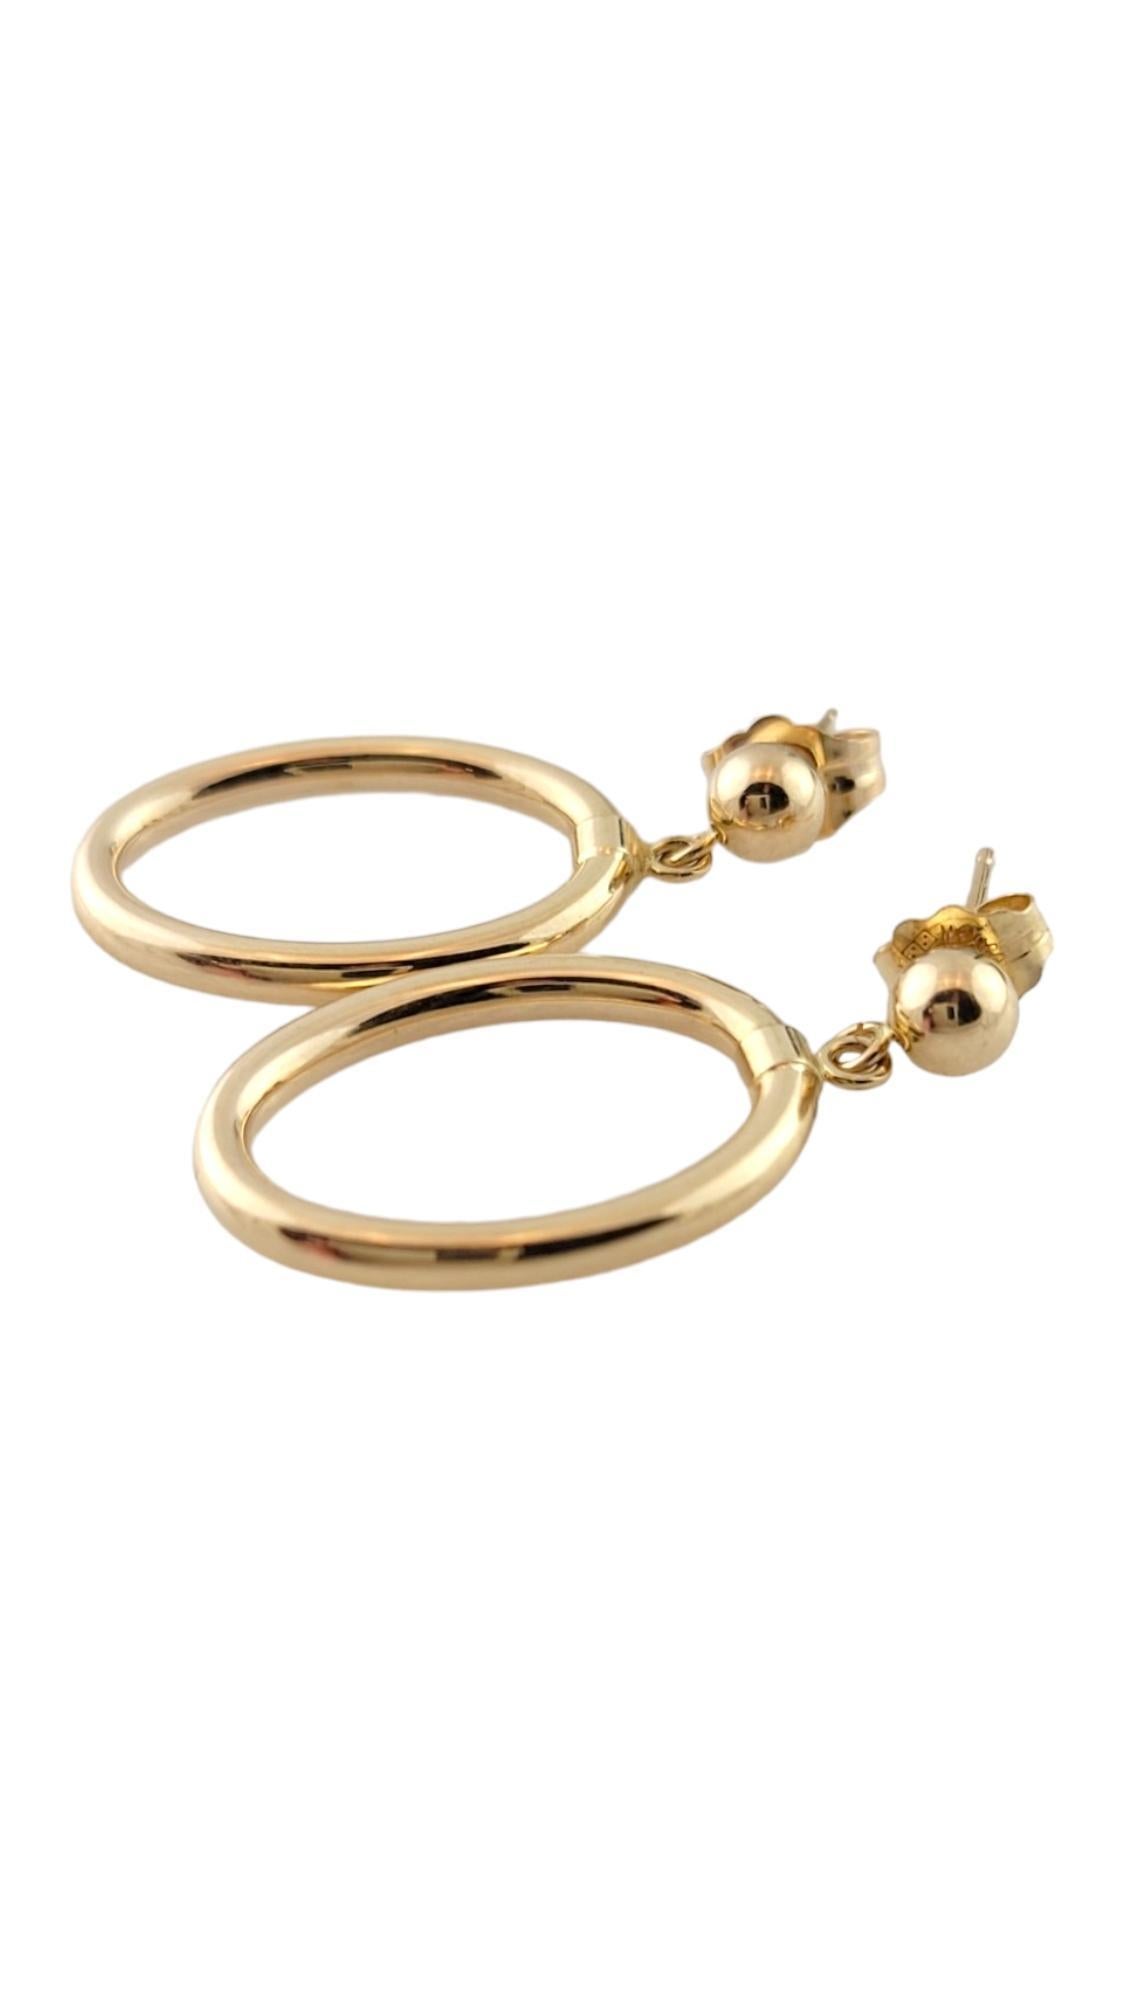 Vintage 14K Yellow Gold Oval Dangle Earrings

You need this beautiful set of dangle oval earrings crafted from gorgeous 14K yellow gold!

Size: 24.5mm X 13.34mm X 1.98mm

Weight: 0.64 dwt/ 0.99 g

Hallmark: EC 14K

Very good condition,